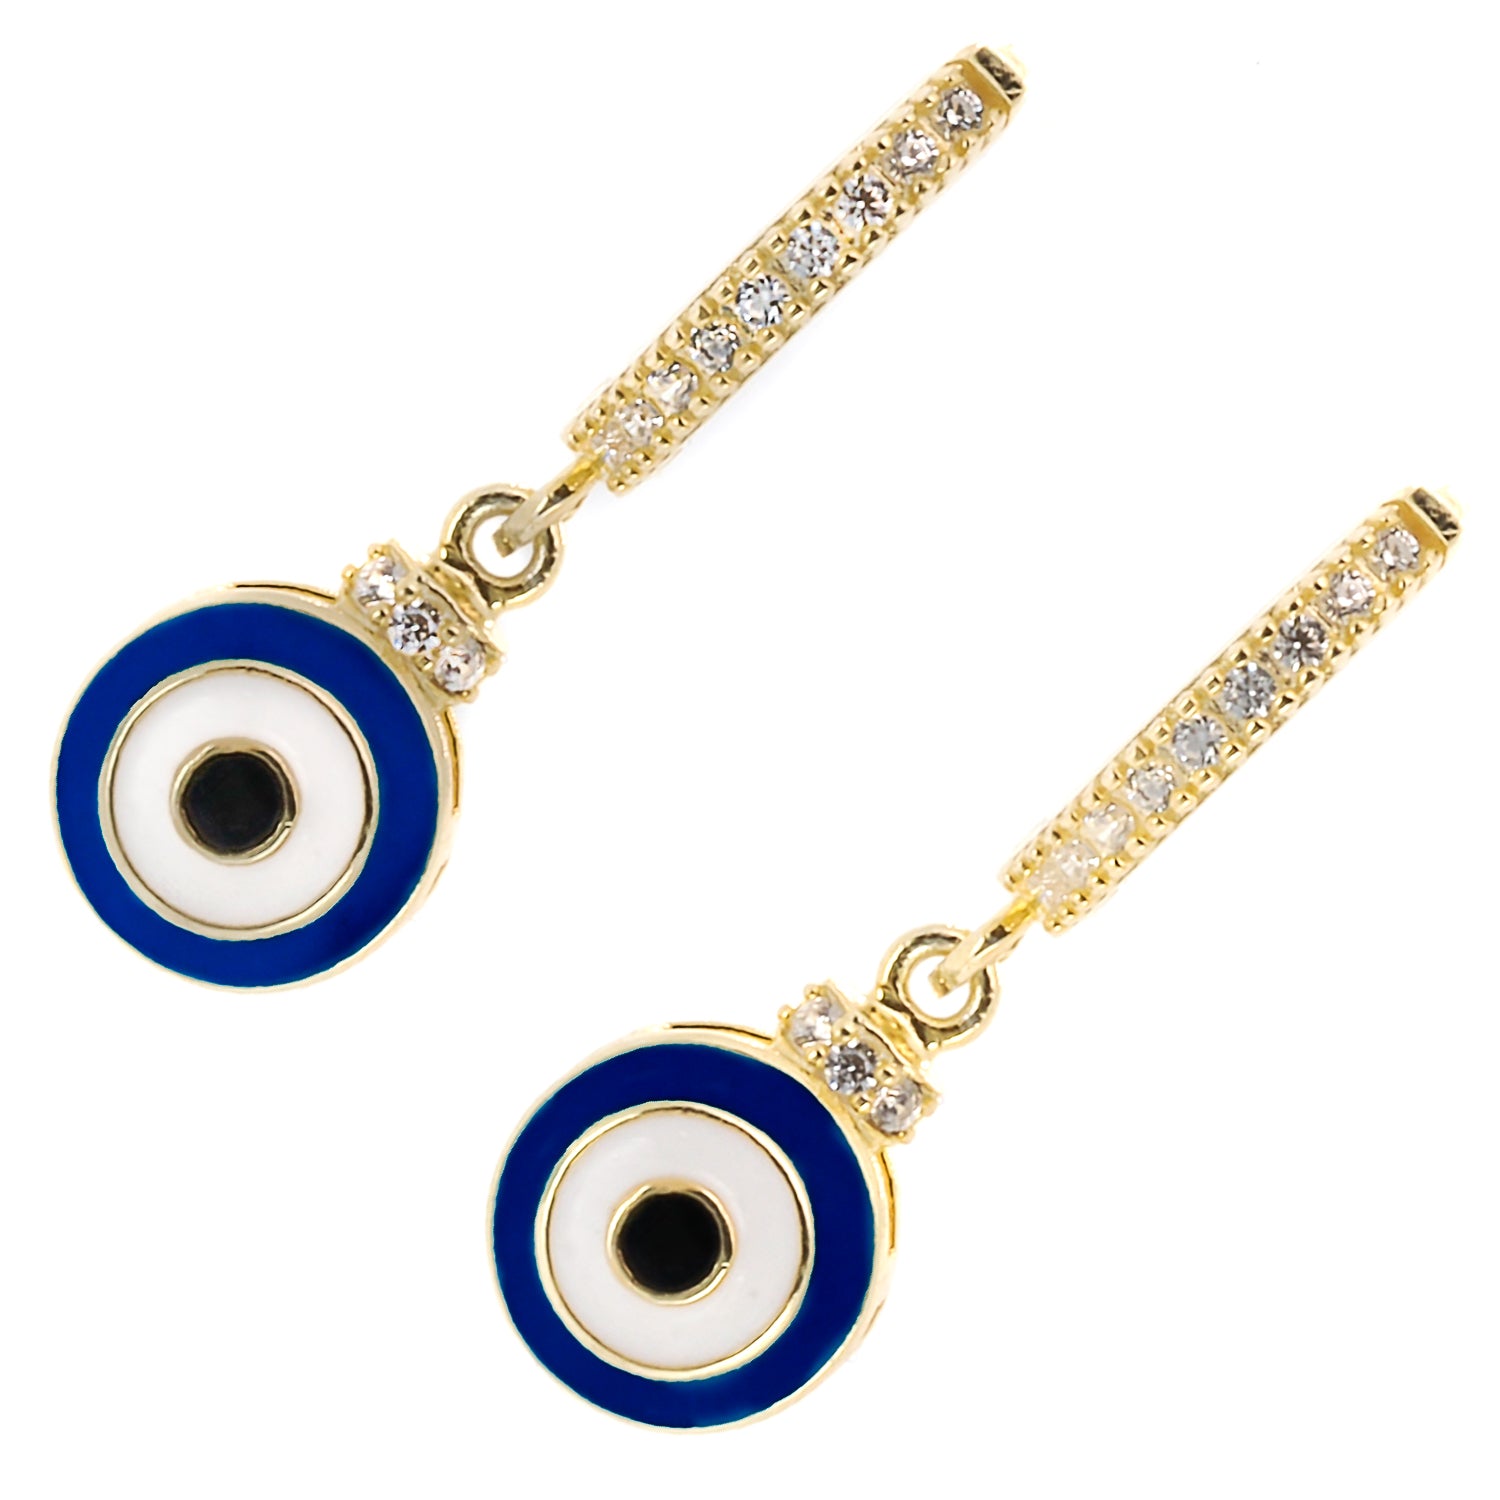 Dainty and elegant gold earrings adorned with blue enamel and zircon stones